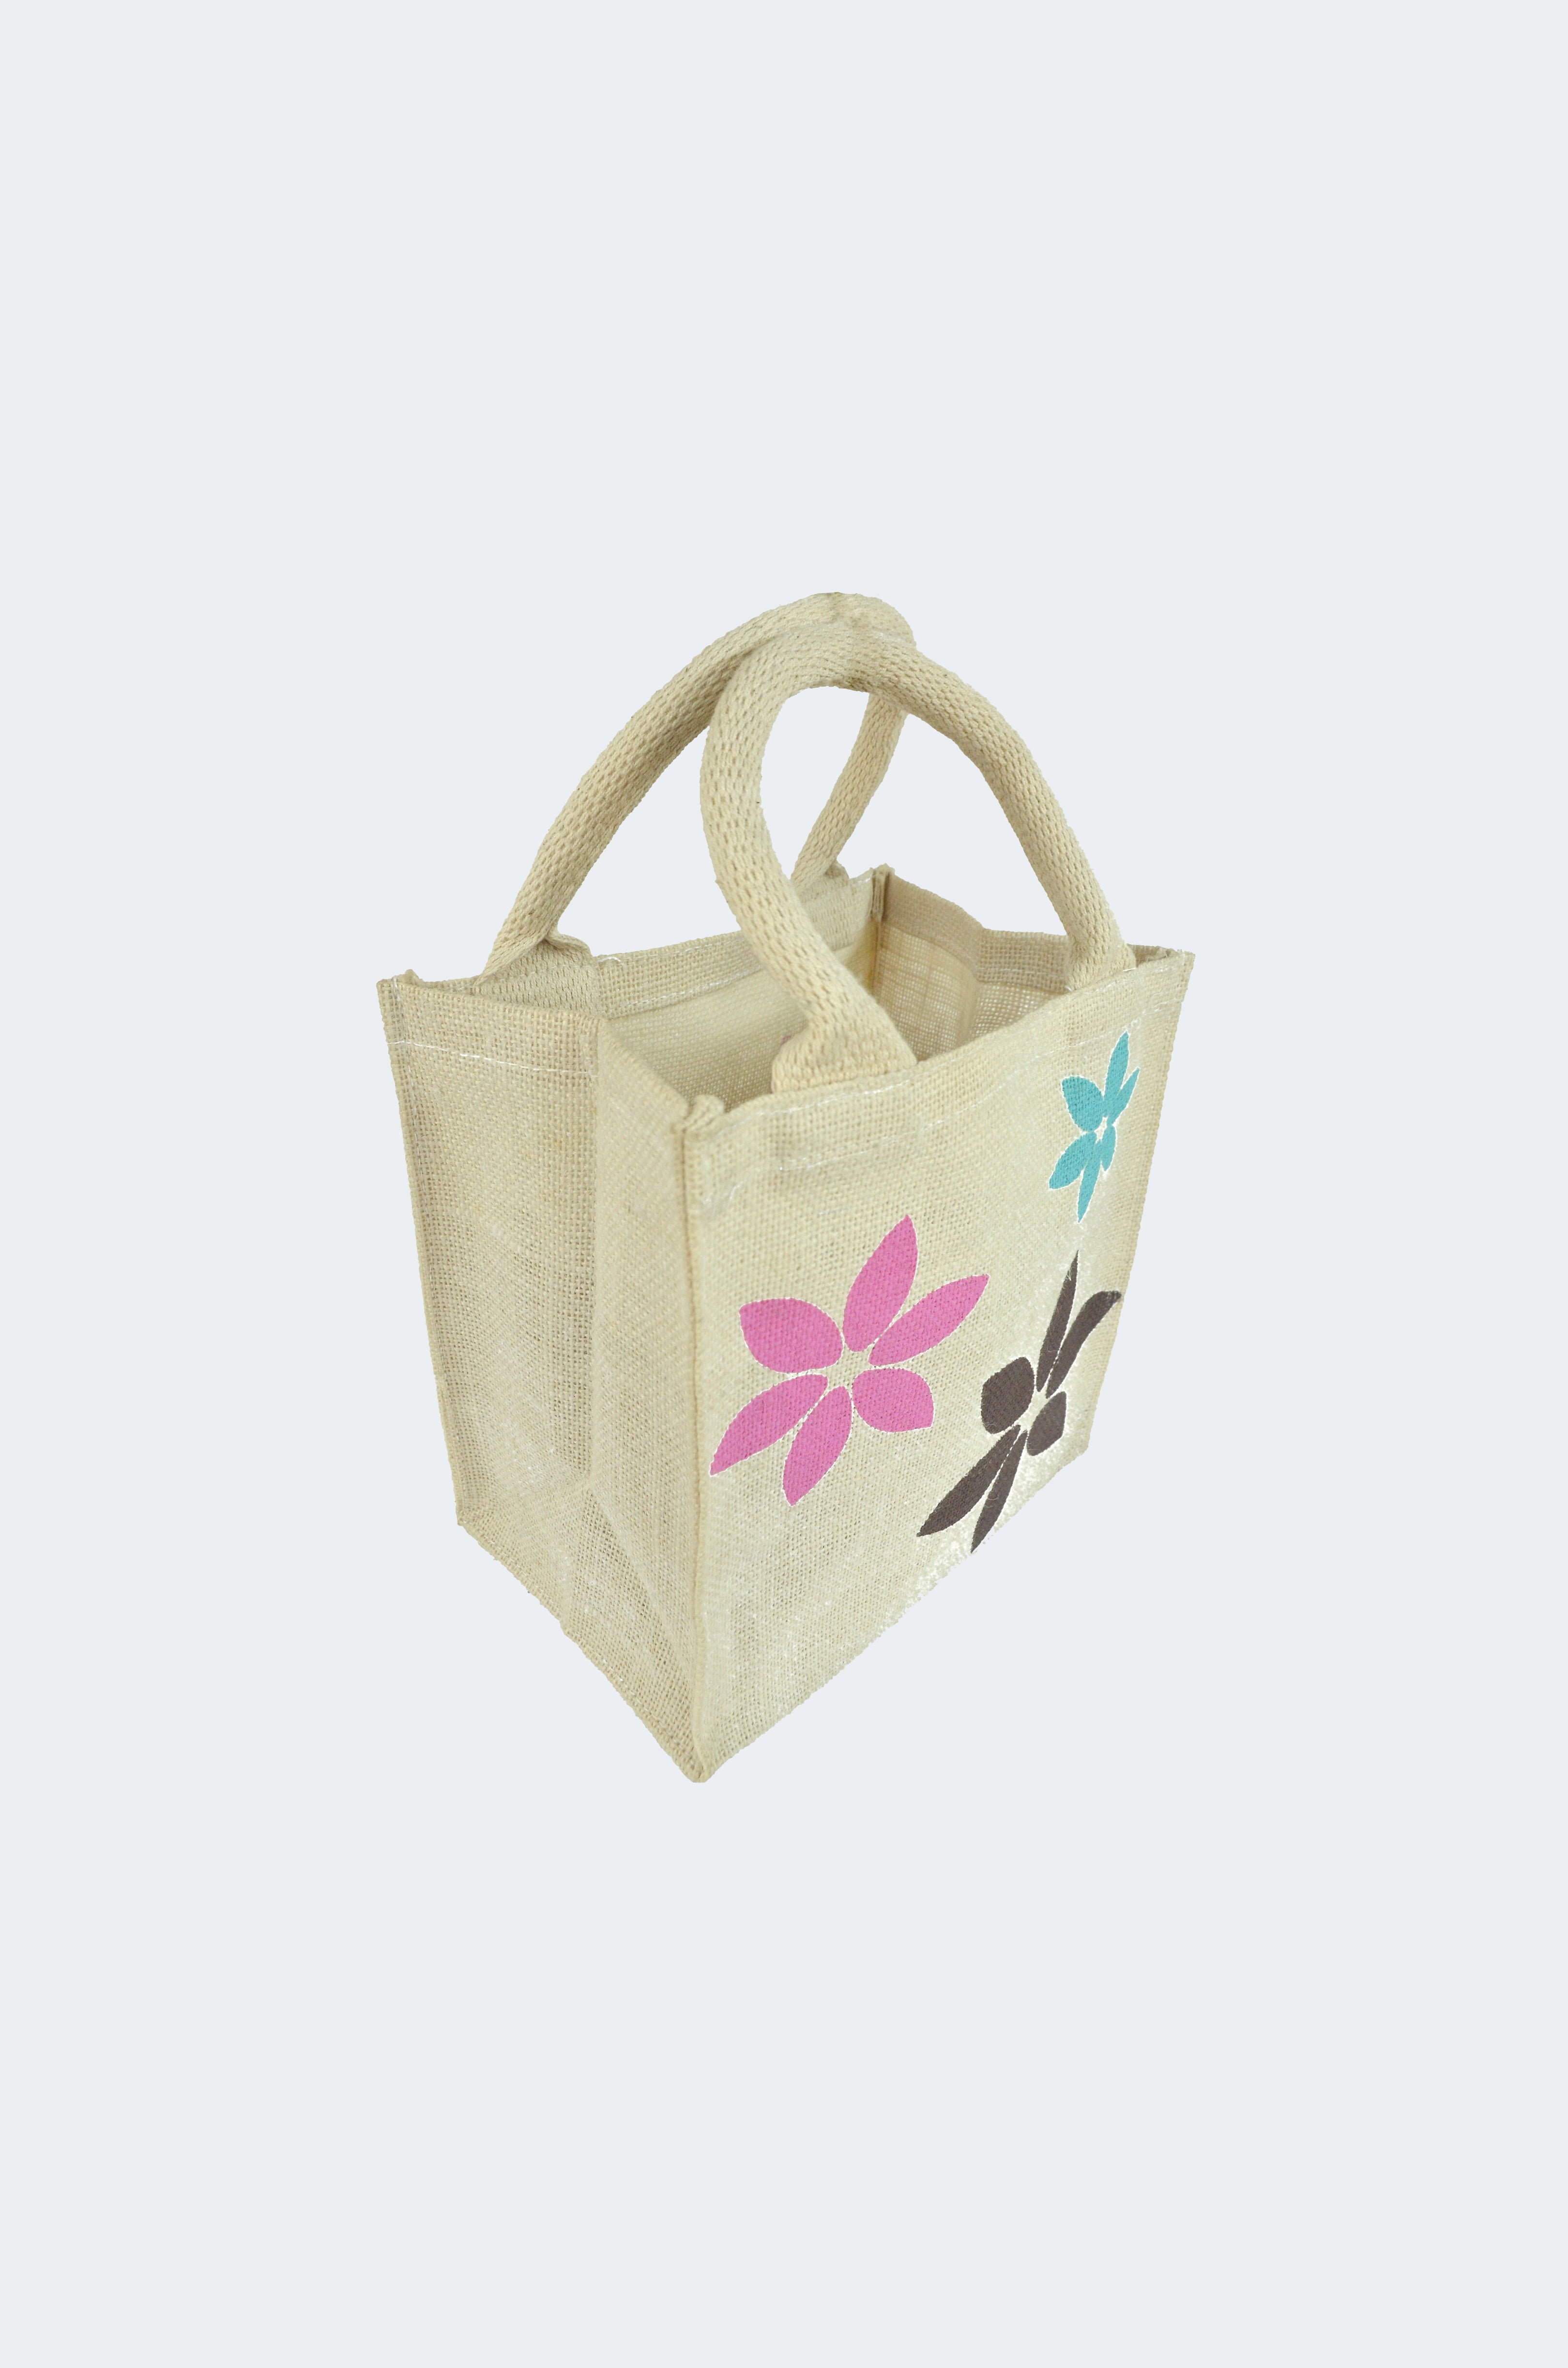 Corporate Jute Lunch/Gift Bag